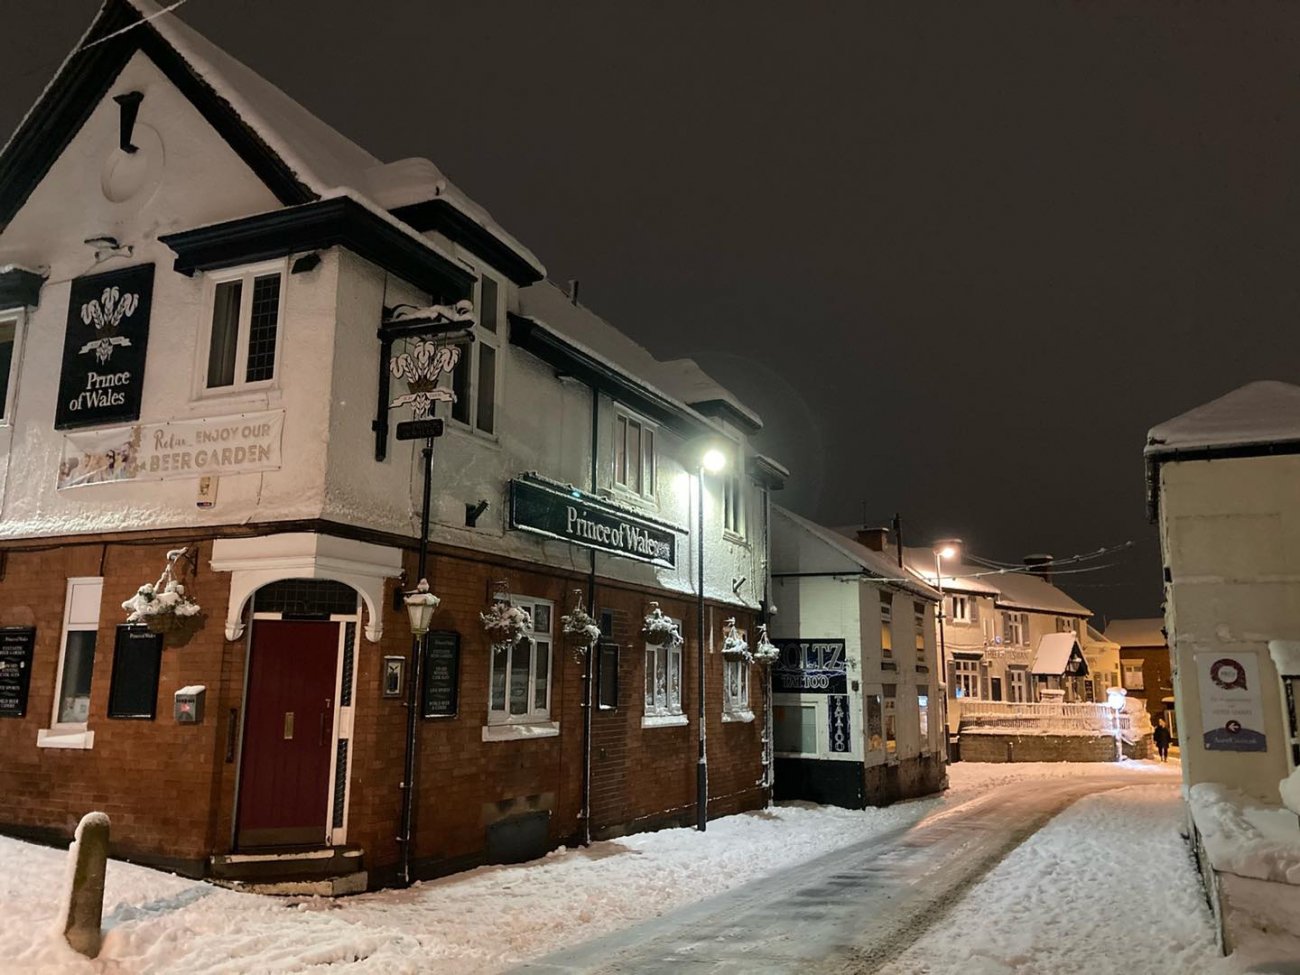 Photograph of Snowy Spondon Nights - Prince of Wales pub